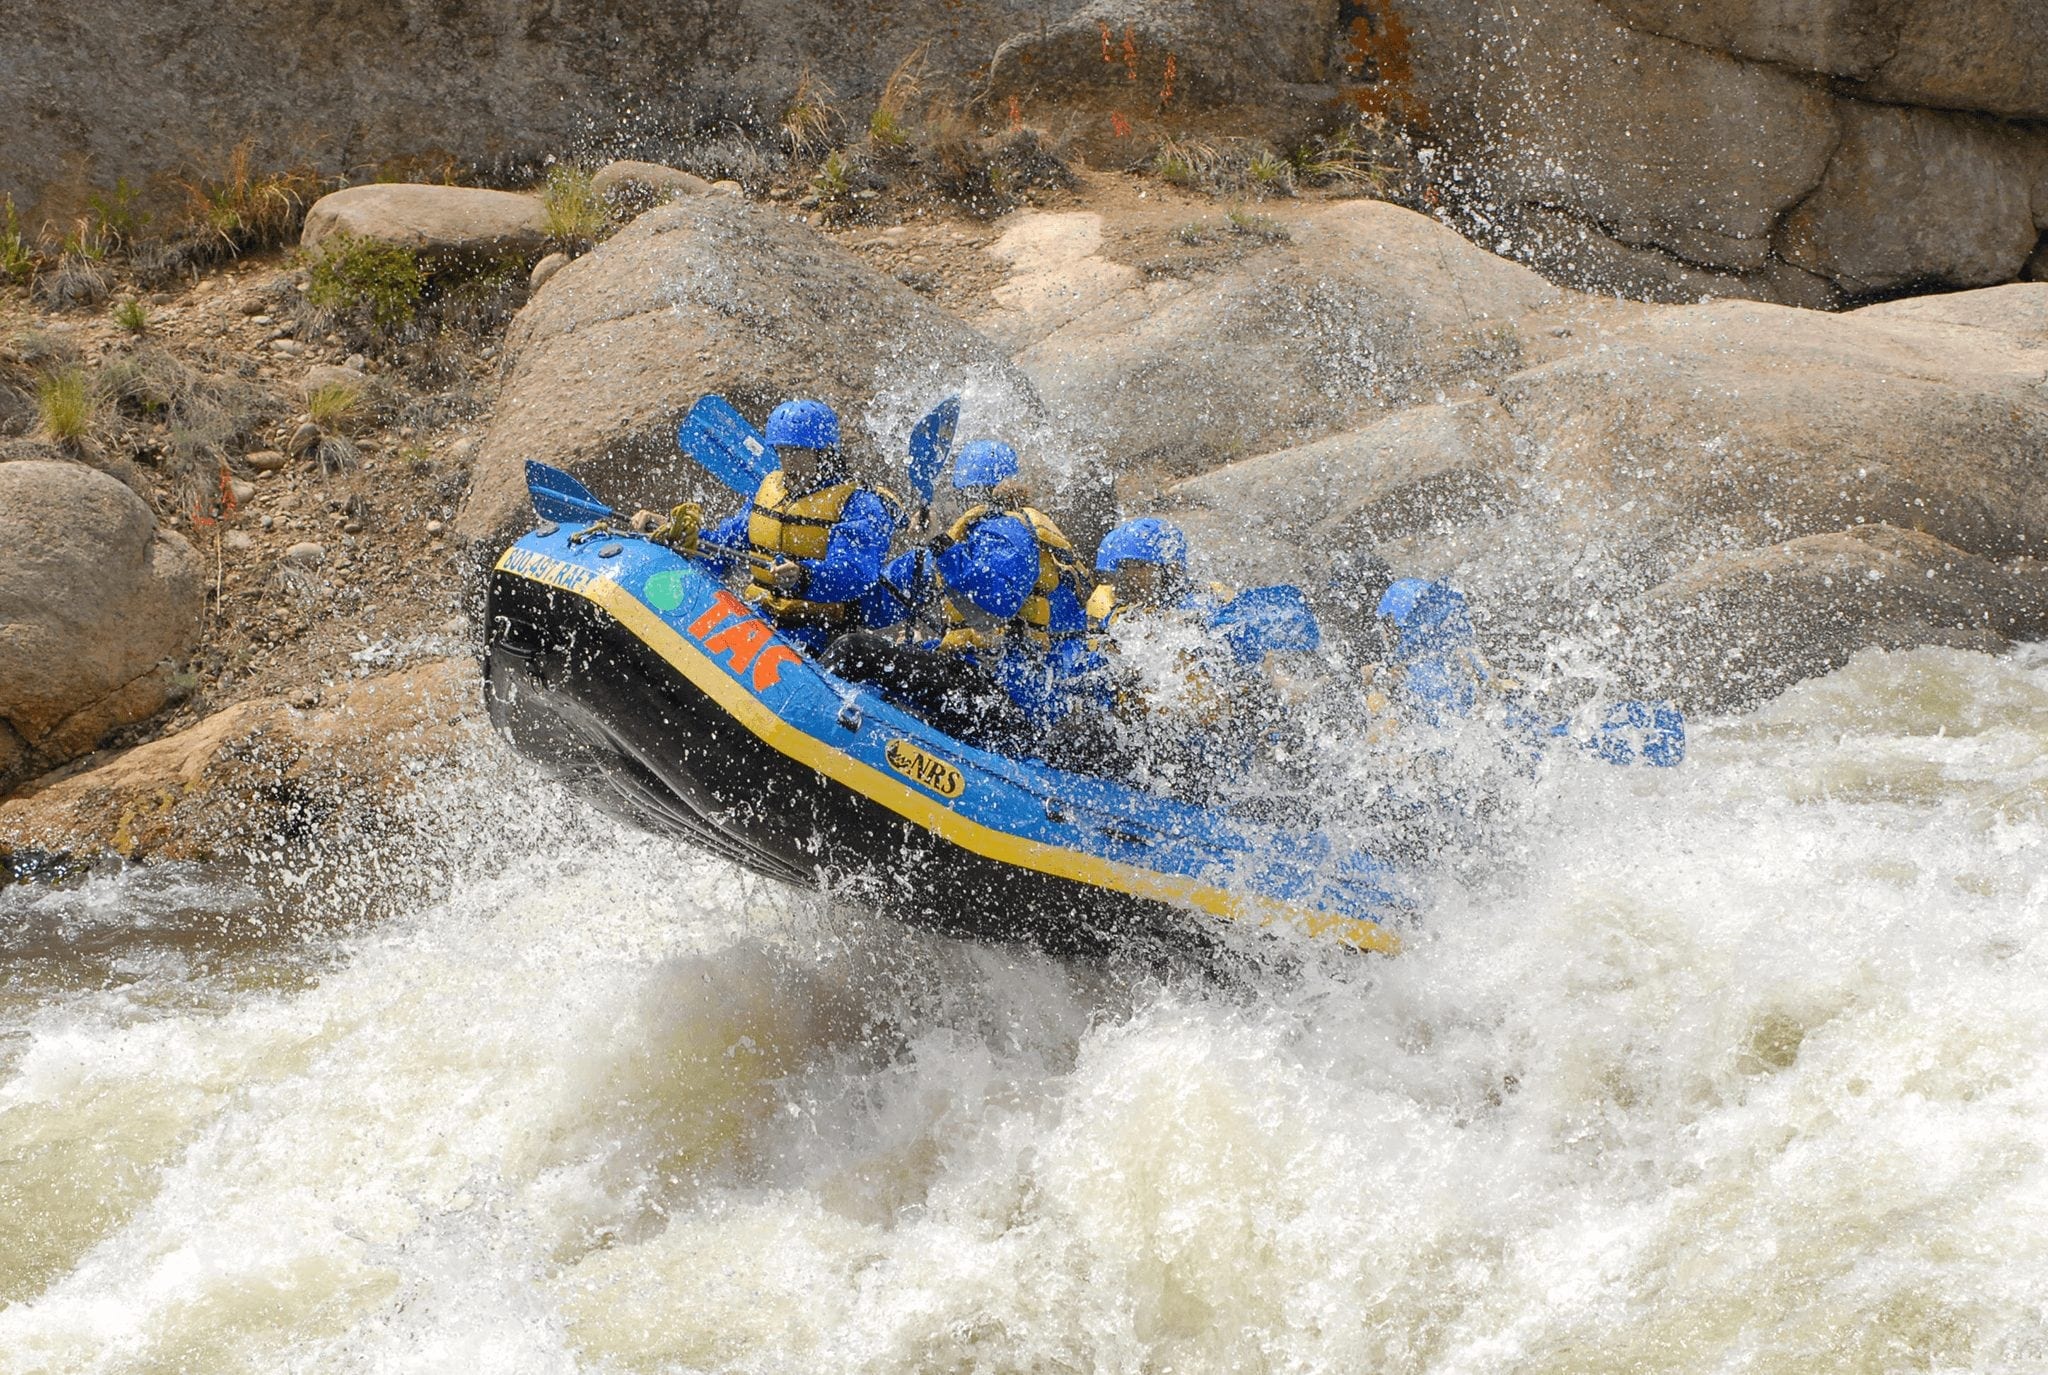 Rafting the rapids during summer in Breckenridge